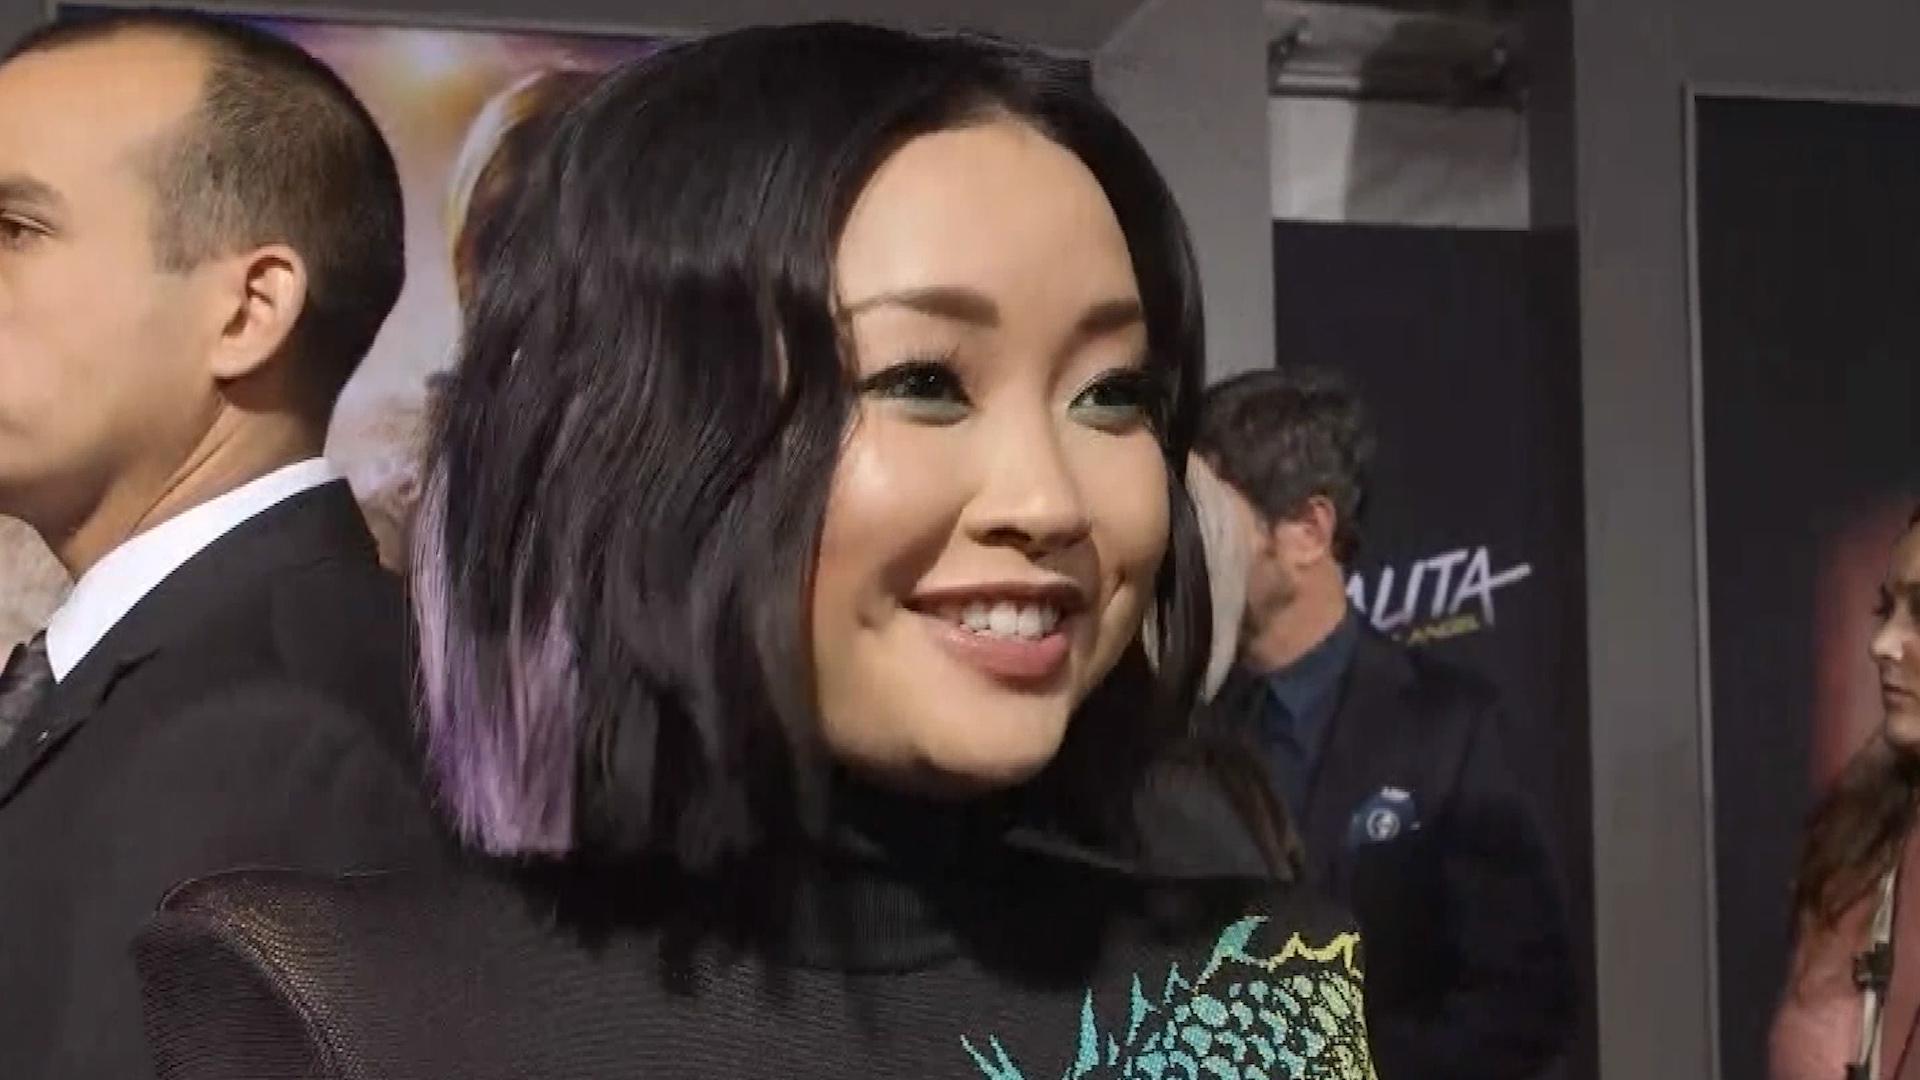 Lana Condor Confirms 'To All the Boys' Sequel Is Starting Production